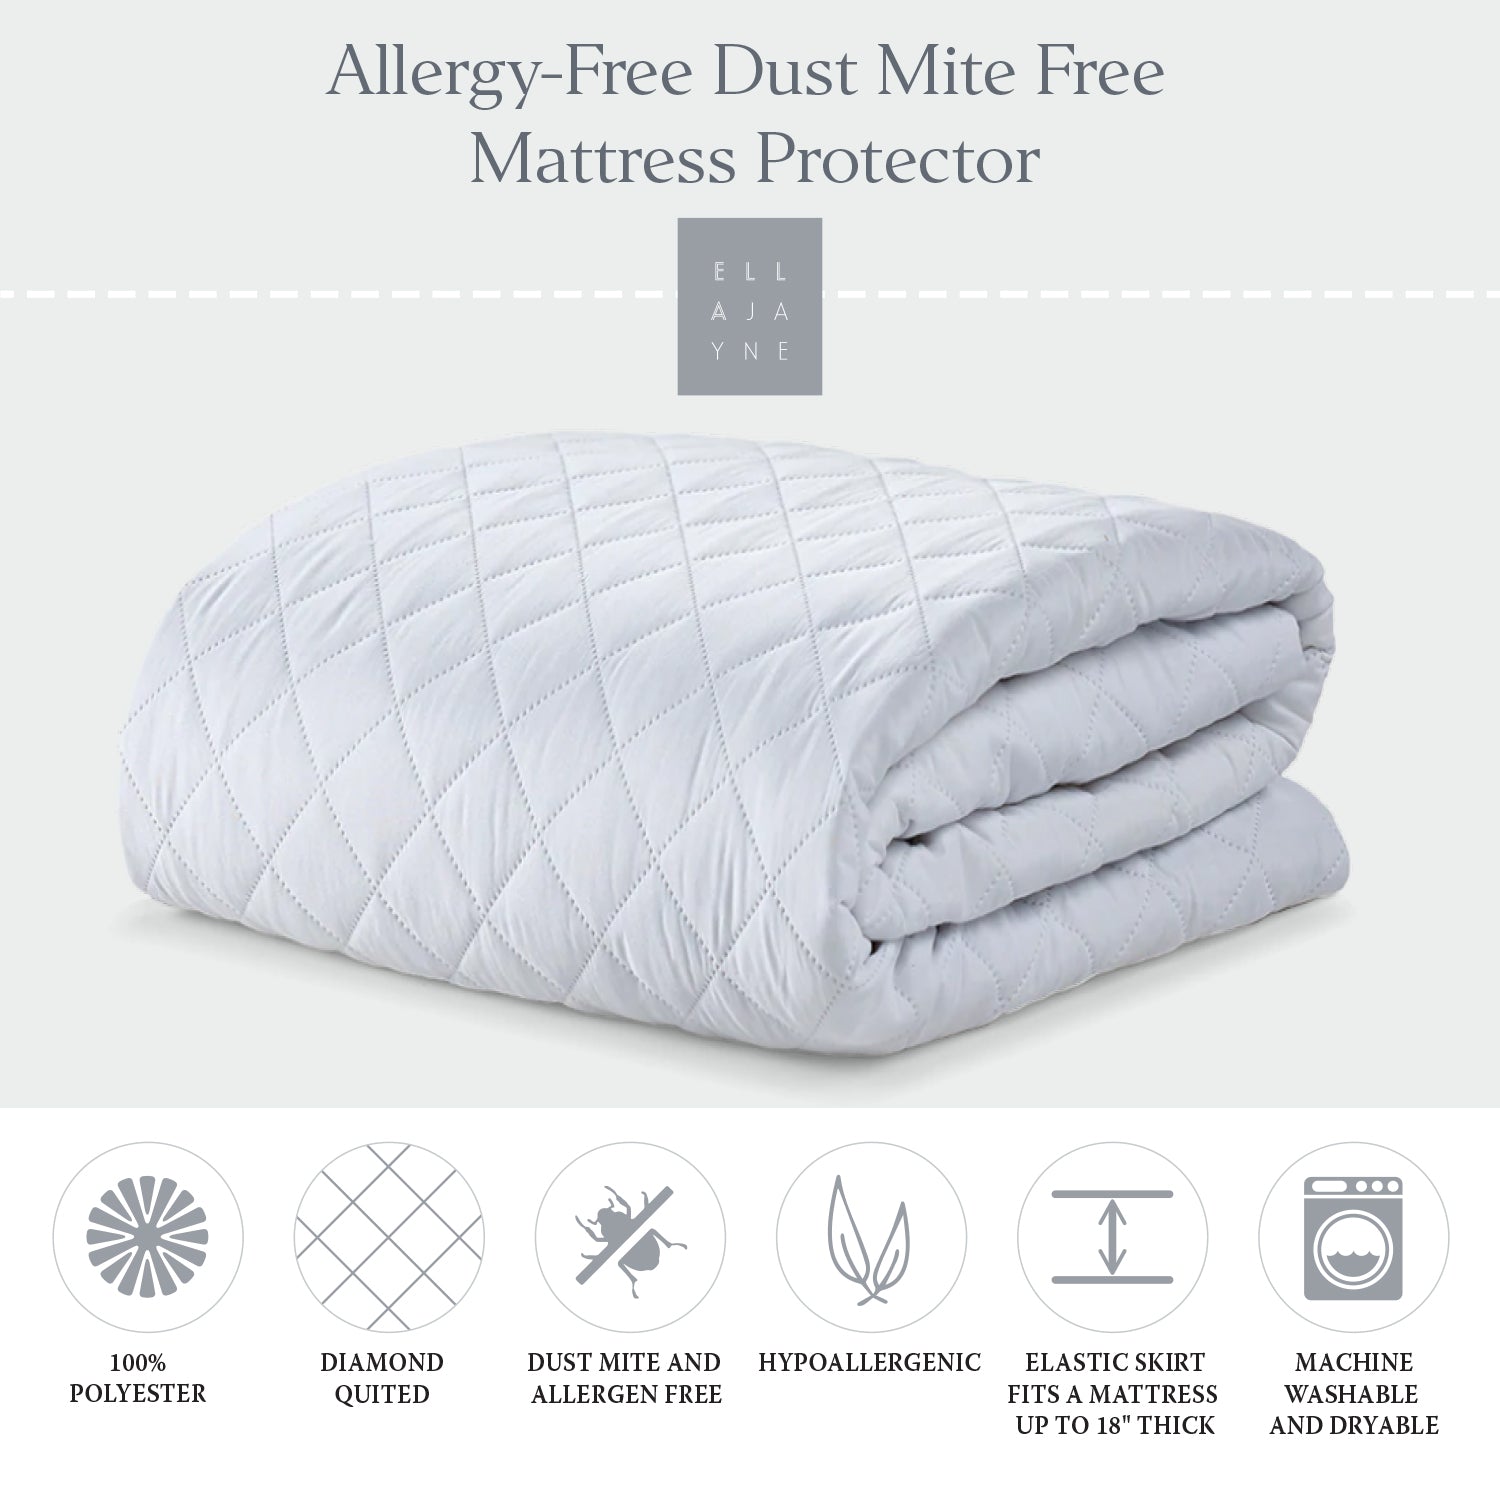 Allergy-Free Dust Mite Free Mattress Protector